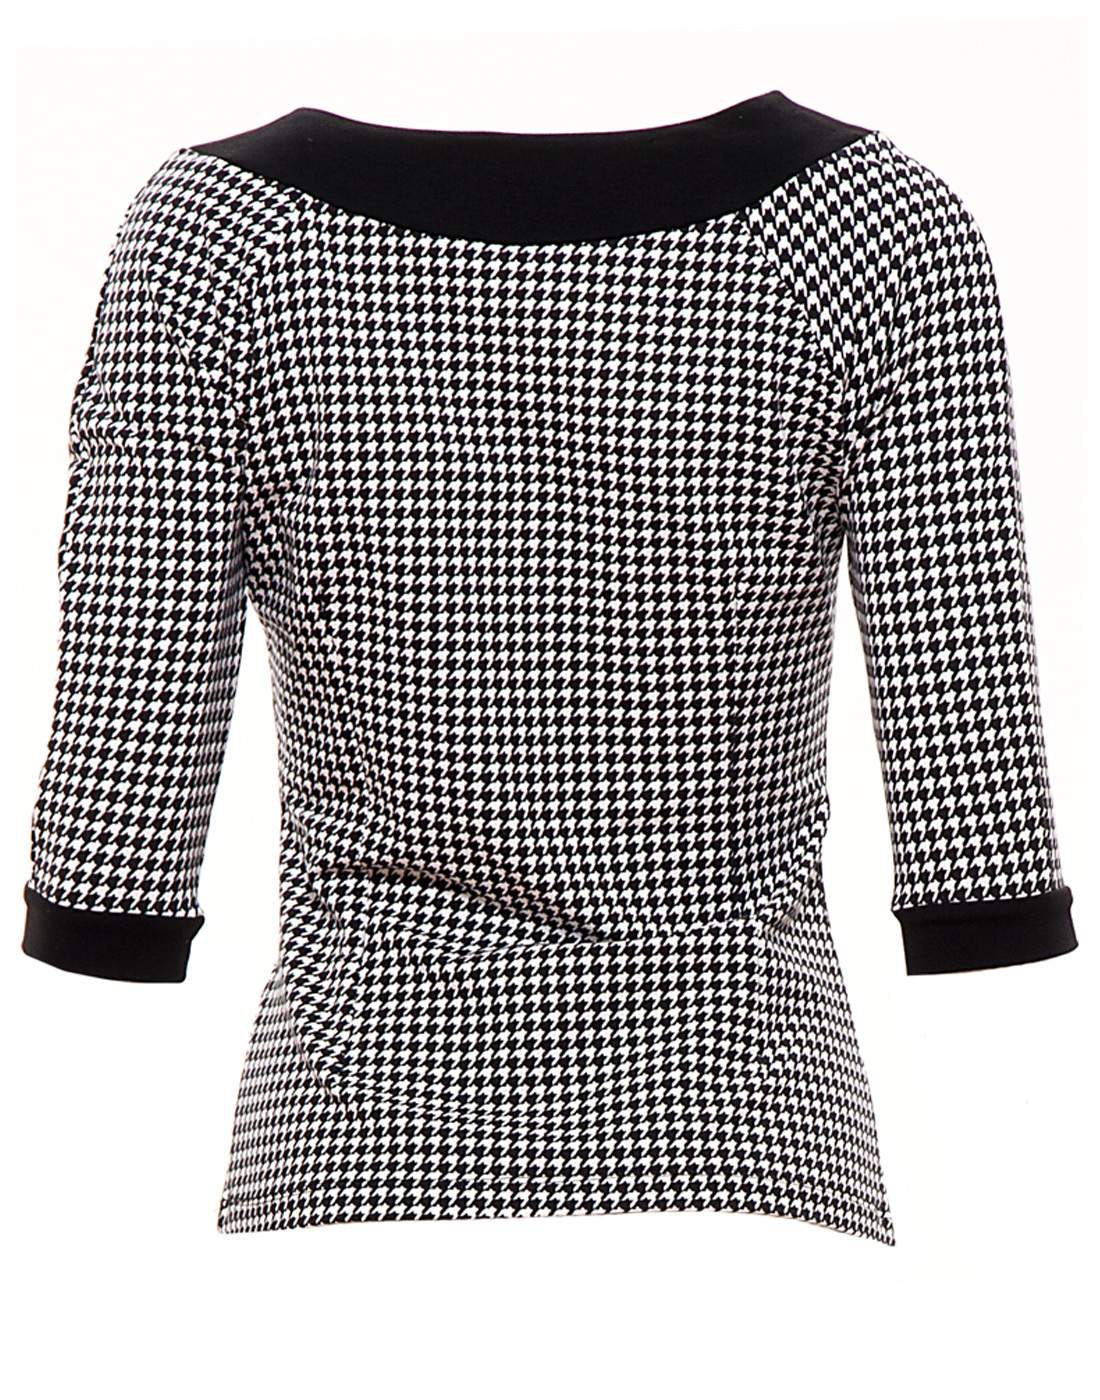 MADEMOISELLE YEYE Rosa 1960s Mod Houndstooth Top in Black/White